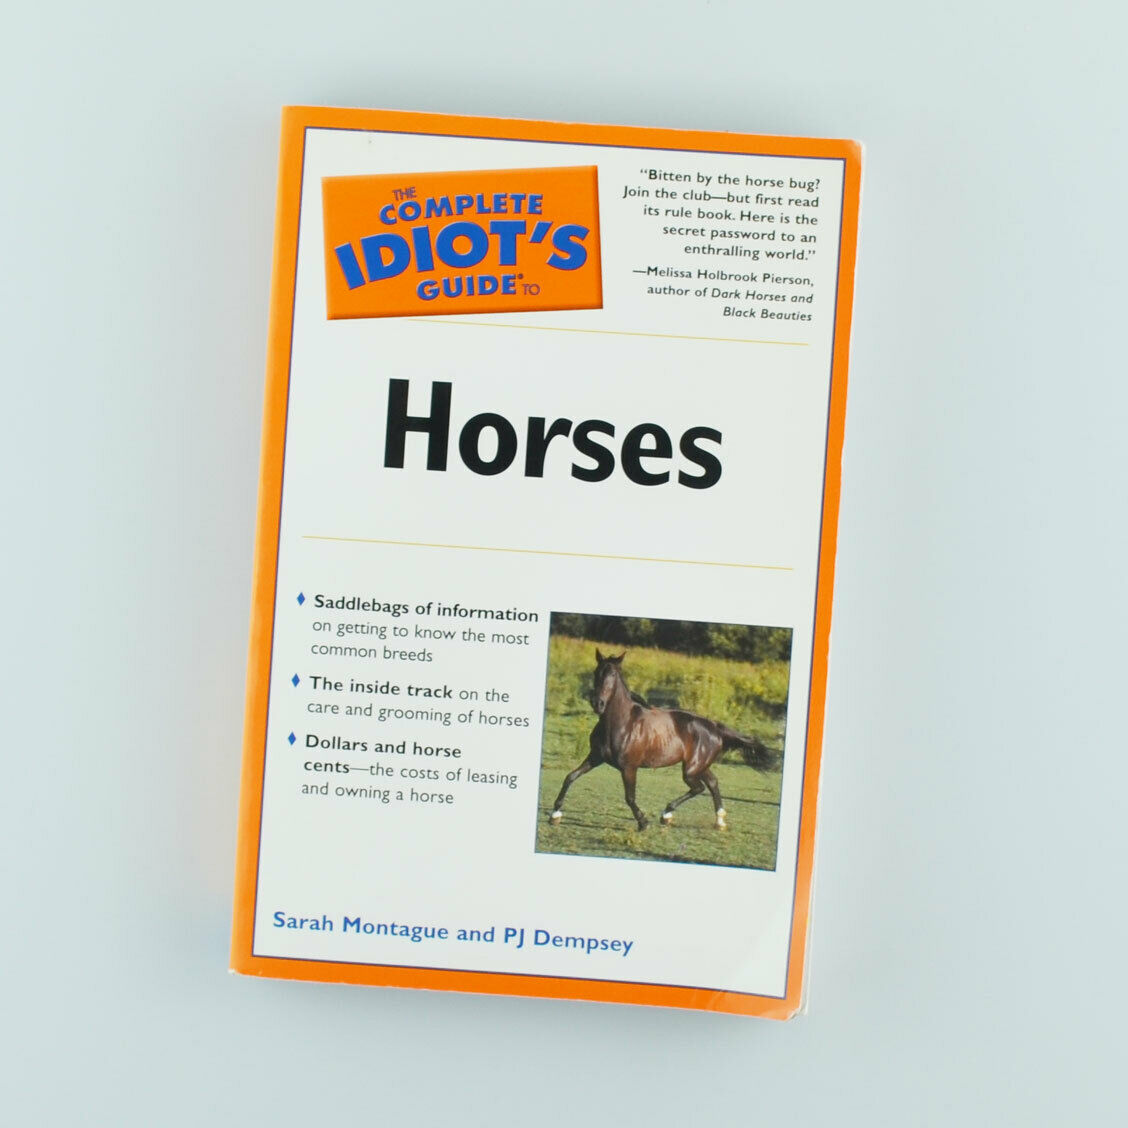 The Complete Idiot's Guide: The Horses by P. J. Dempsey and Sarah Montague 2003